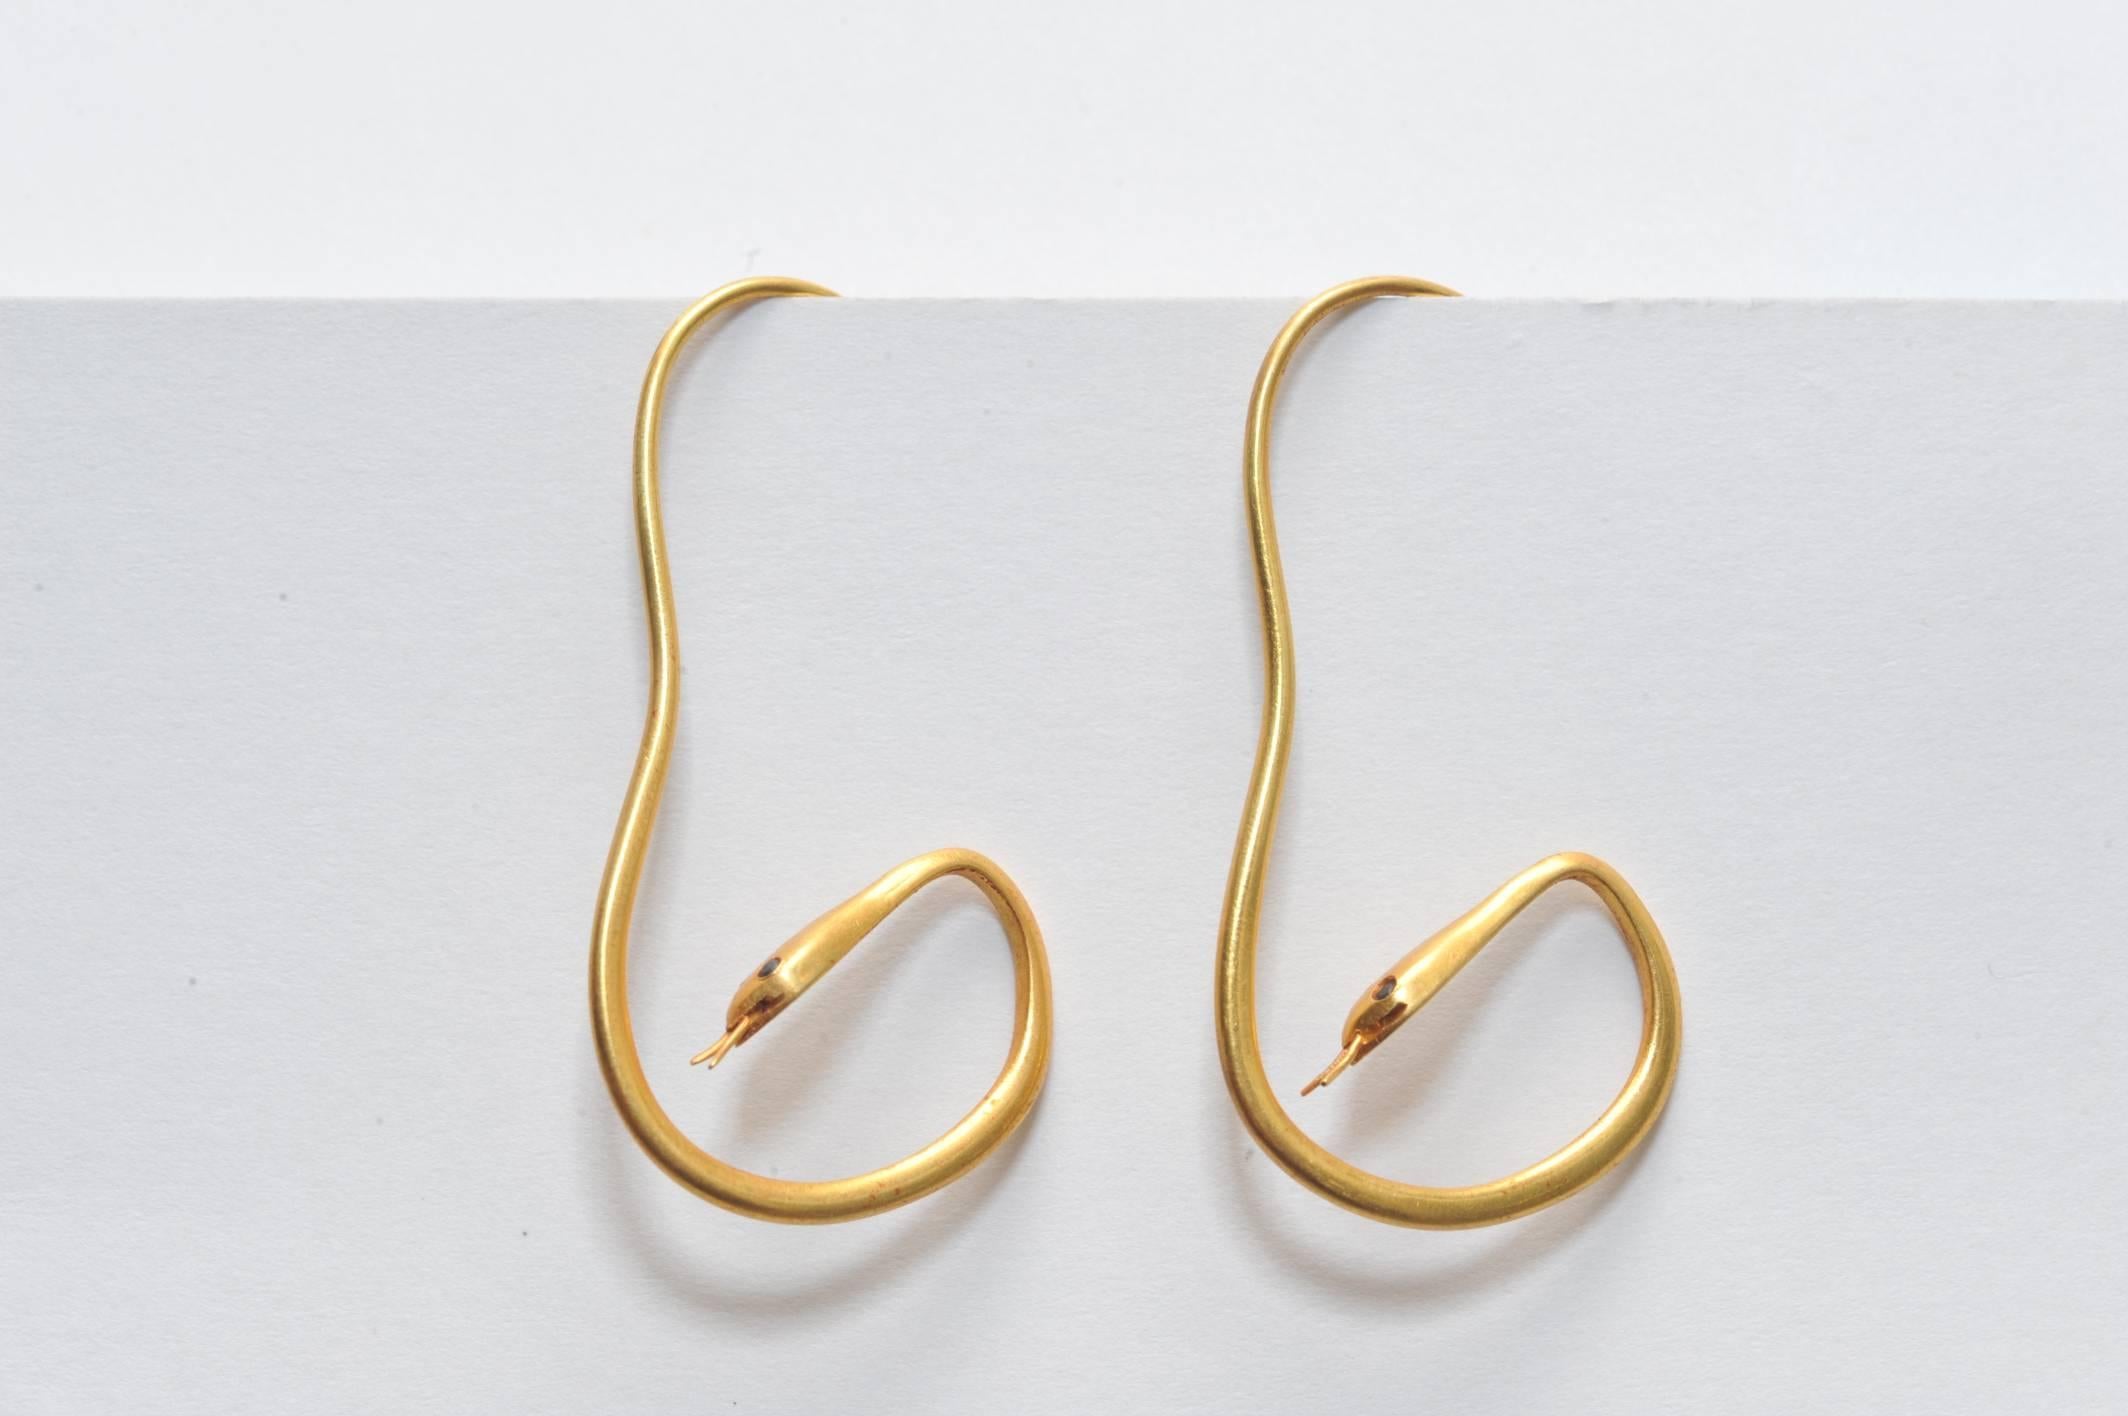 Pair of 22K Gold snake earrings with sapphire eyes in the shape of a quasi hoop.  Complete with forked tongue.  Simple wire back.